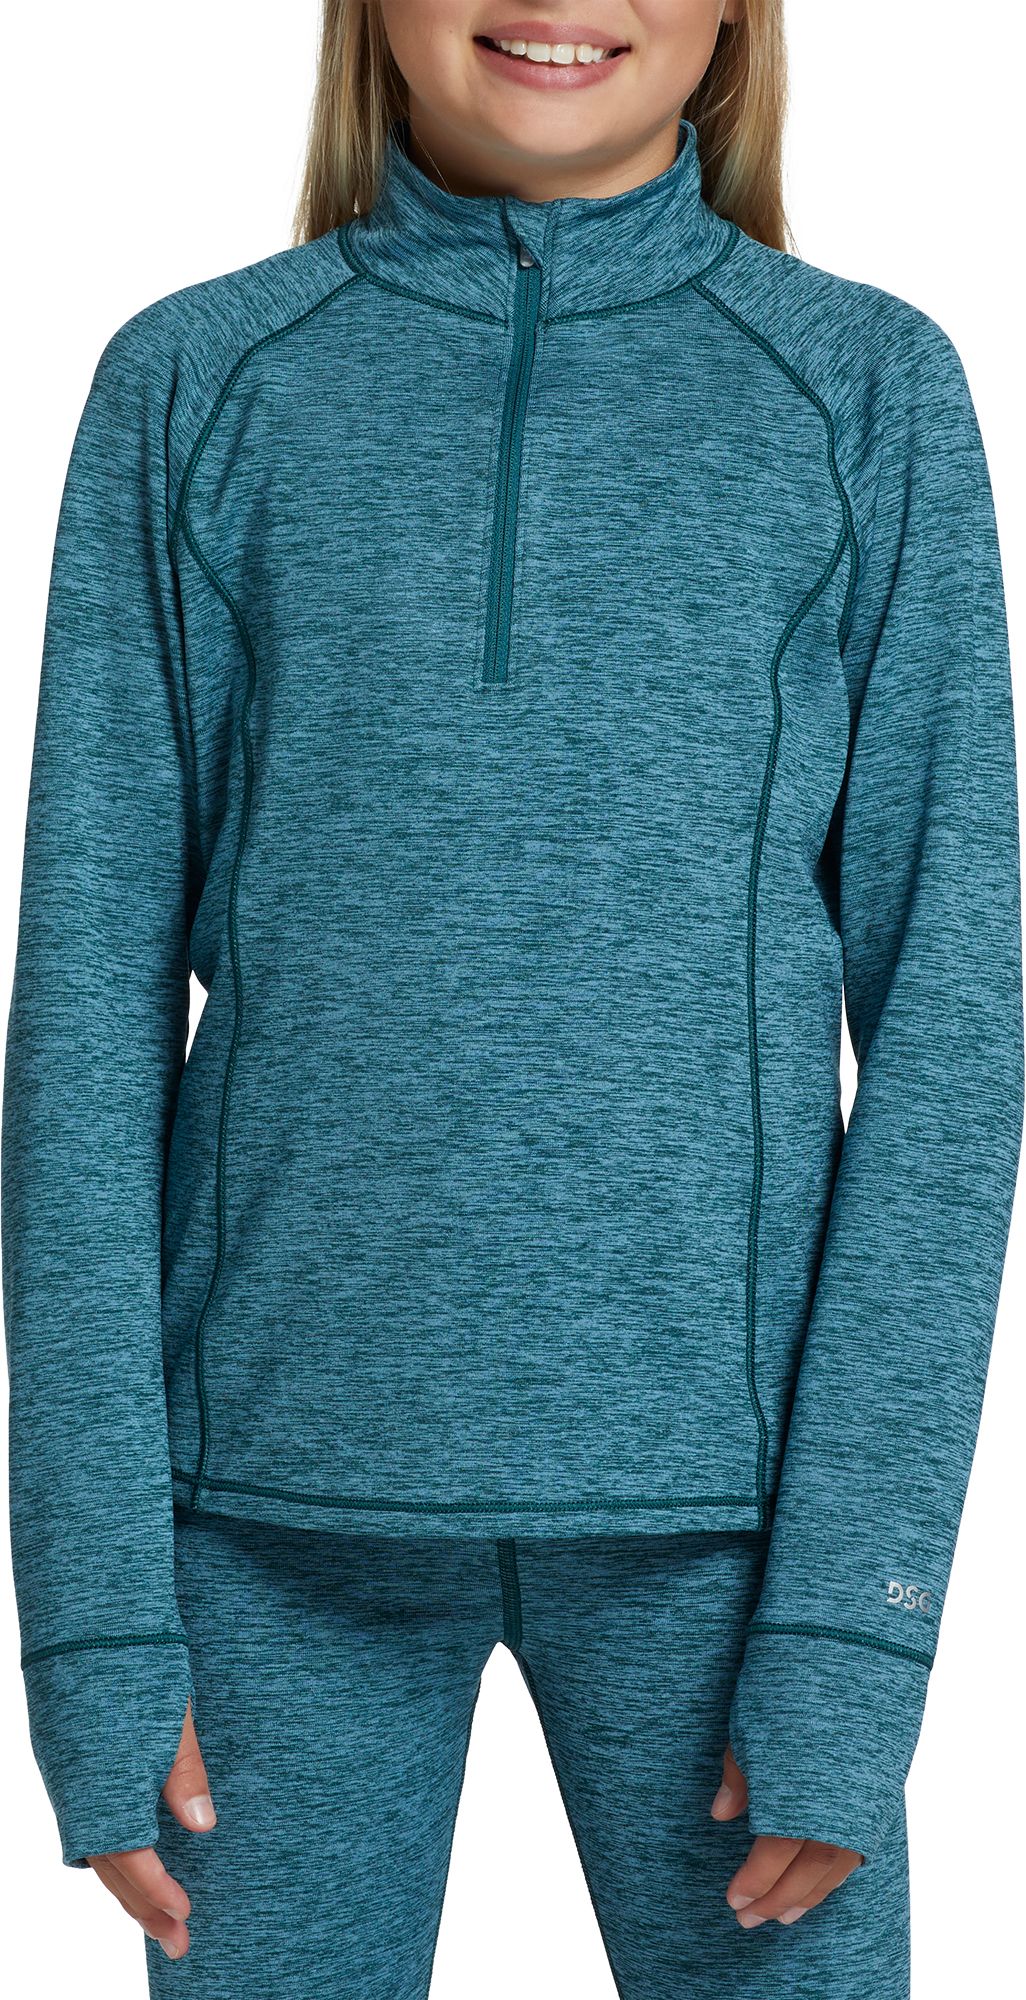 DSG Girls Cold Weather 1/4 Zip Pullover